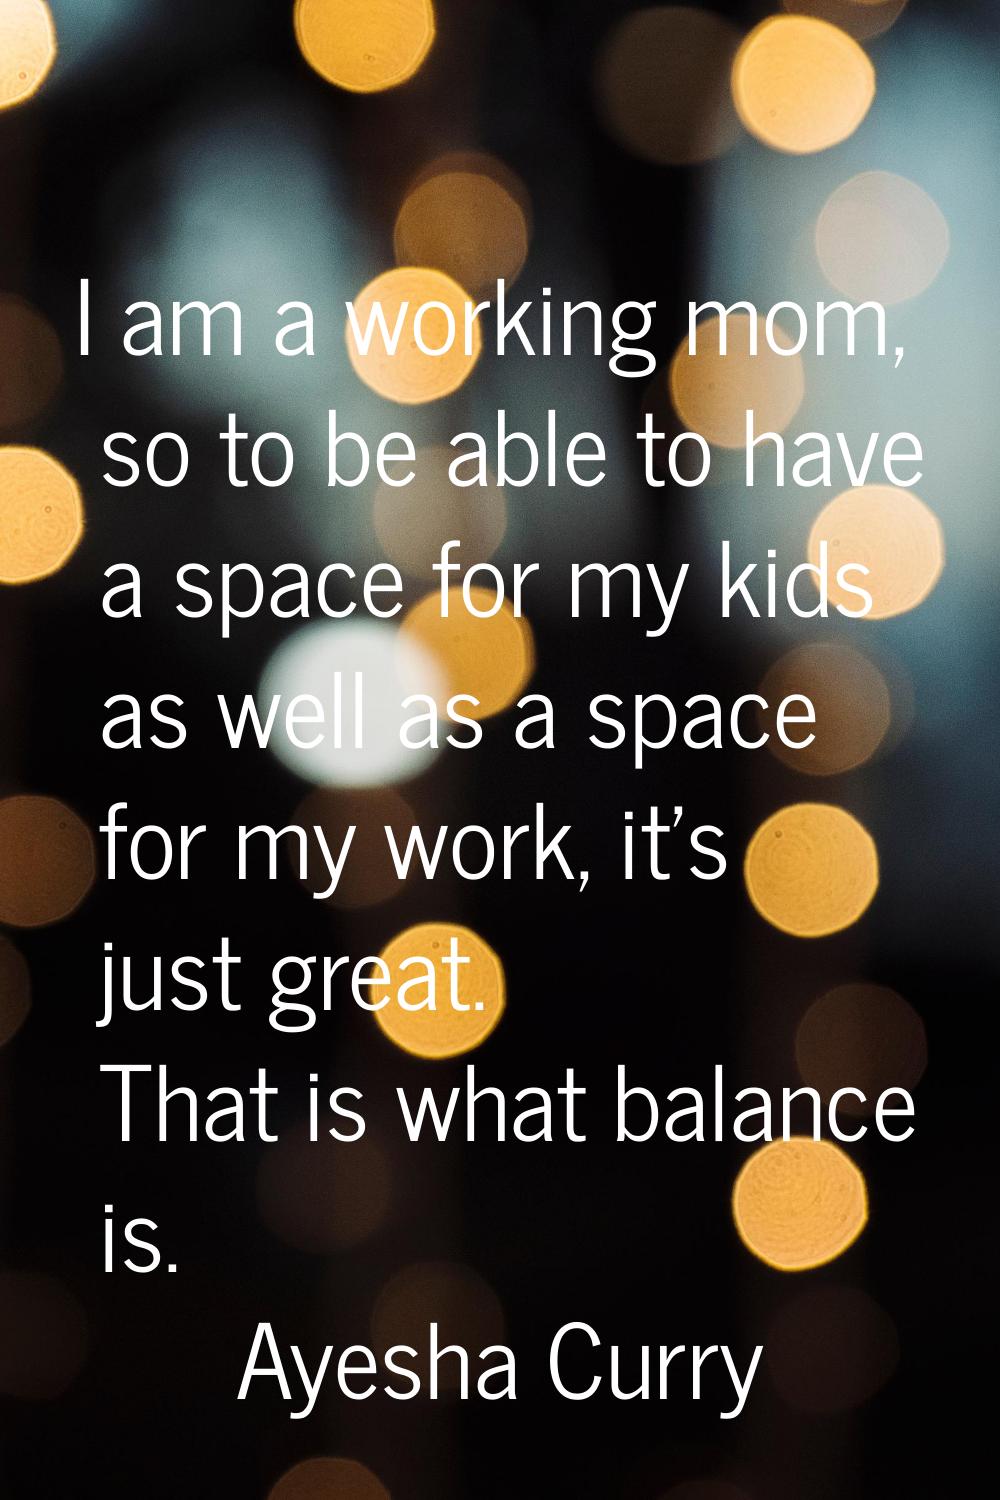 I am a working mom, so to be able to have a space for my kids as well as a space for my work, it's 